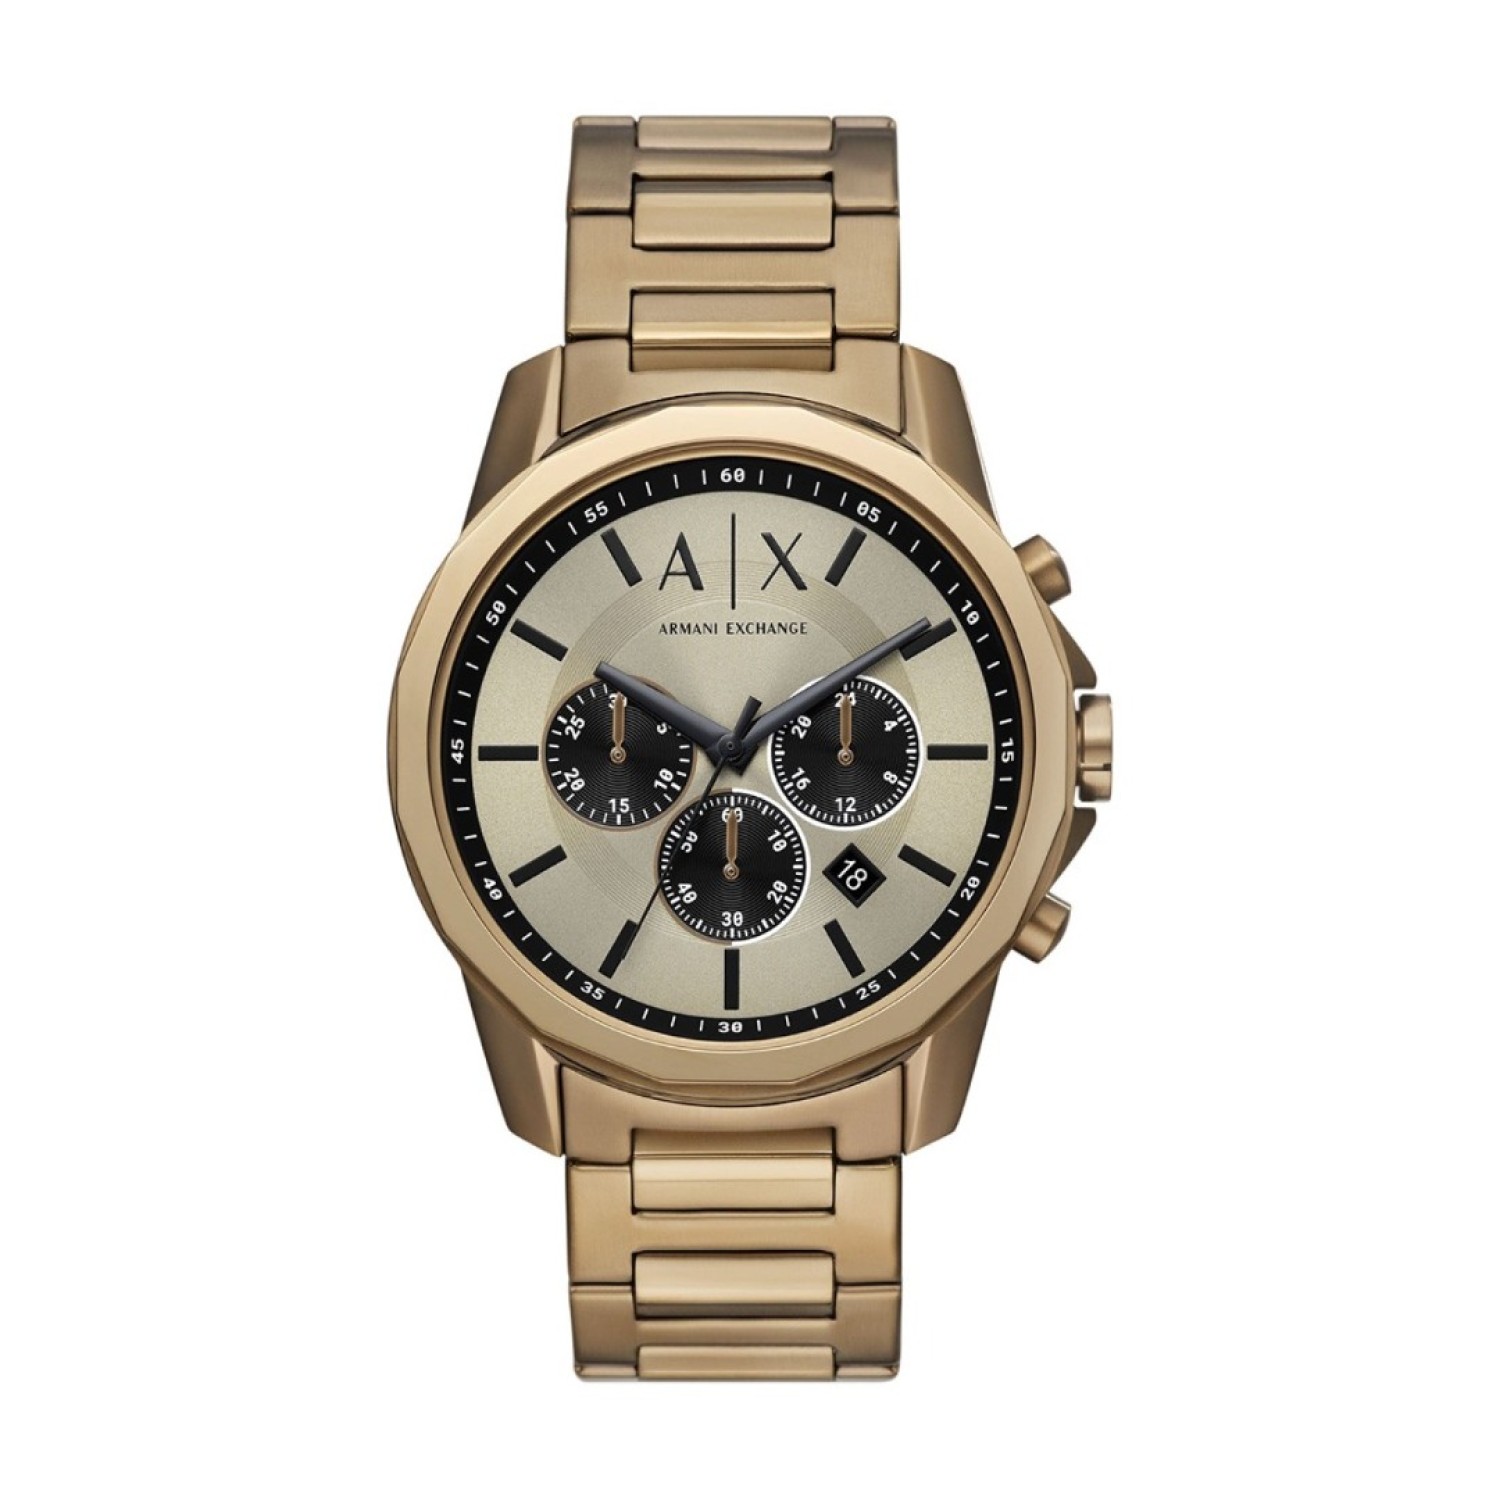 AX1739 A|X Armani Exchange Chronograph Bronze -Tone Stainless Steel Watch. Afterpay - Split your purchase into 4 instalments - Pay for your purchase over 4 instalments, due every two weeks.